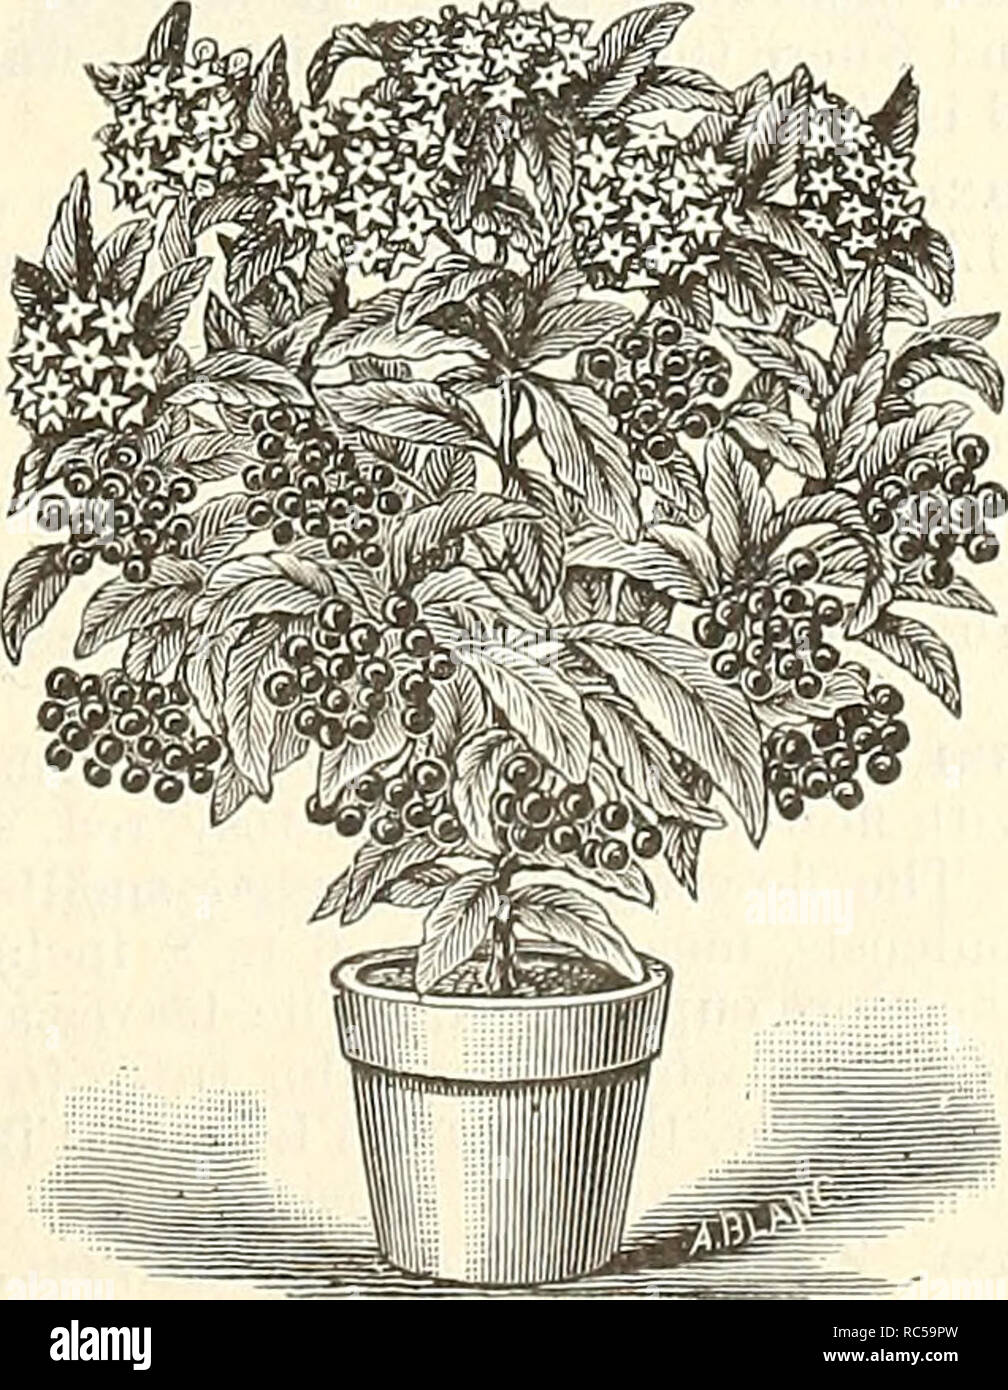 . Dreer's mid-summer list : strawberry, celery and other seasonable plants, seeds etc. July 1894 August. Bulbs (Plants) Catalogs; Flowers Seeds Catalogs; Fruit Seeds Catalogs; Vegetables Seeds Catalogs; Nurseries (Horticulture) Catalogs. Alocasia Macrorhiza Variegata. A strictly handsome ornamental leaved plant, foliage nearly as large as Caladium Esculentum, light green, broadly splashed with white. Its easy growth, combined with rich variegation, makes this one of the most valuable decorative plants. 50 cts to $1.00 each. Ardisia Crenulata. A very ornamental greenhouse plant, with dark everg Stock Photo